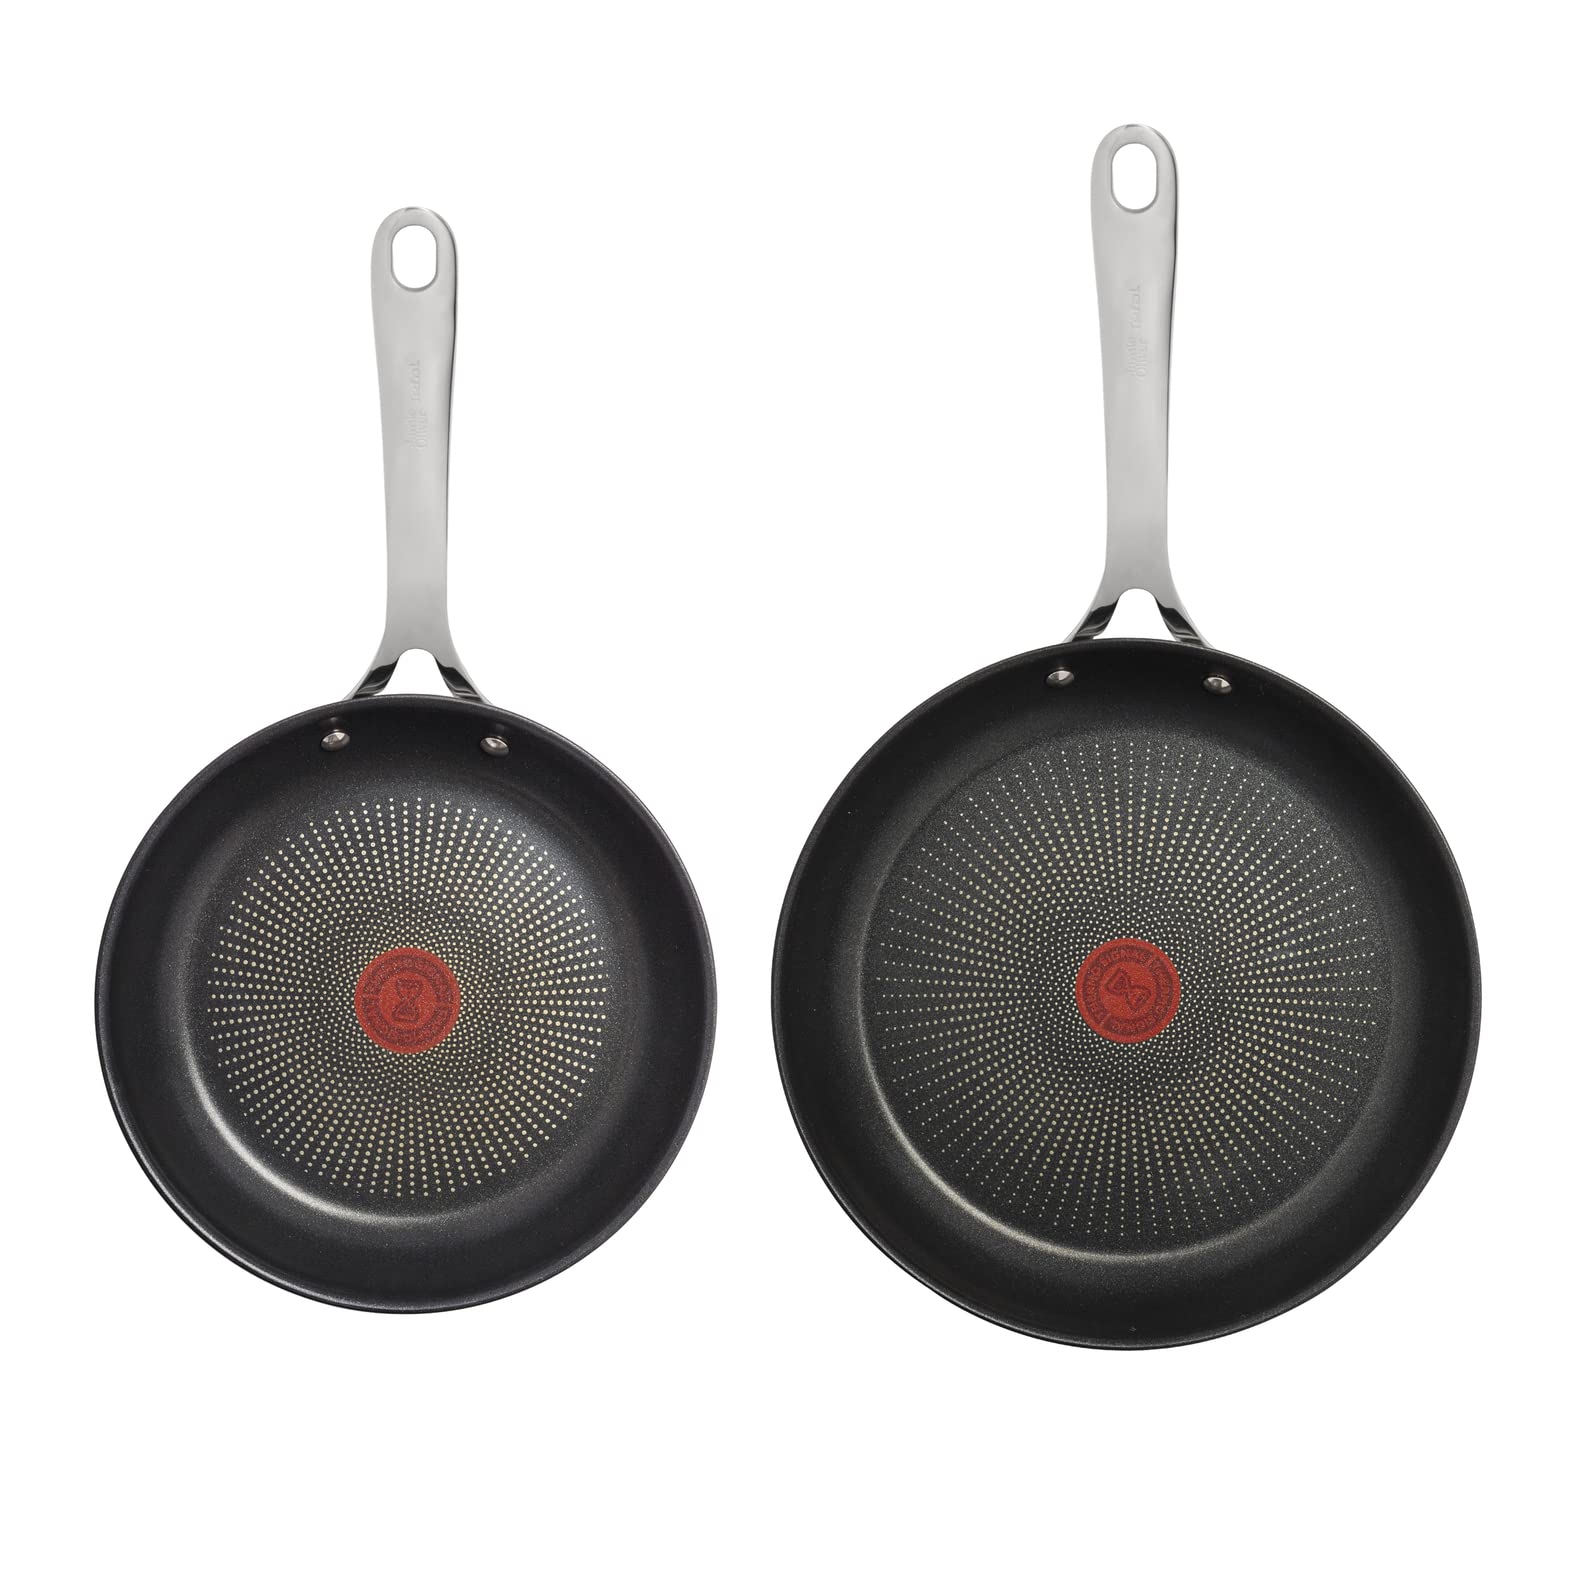 Tefal Jamie Oliver Cook's Direct Stainless Steel, 2 Piece Frying Pan Set, 24 & 28cm, Non-Stick Coating, Heat Indicator, Riveted Safe-Grip Handle, Induction Hob Compatible, E304S244